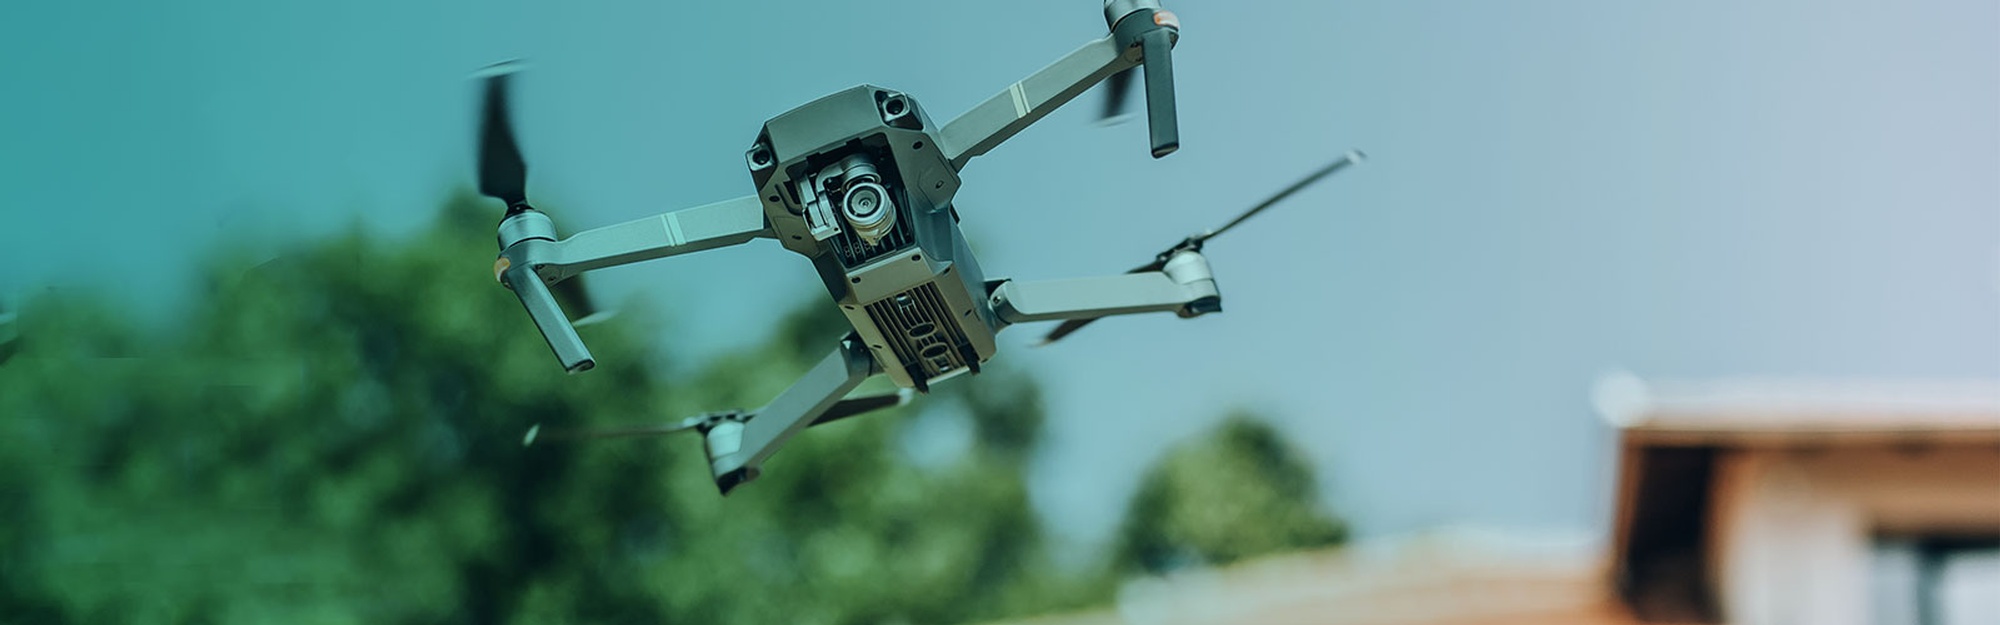 Omaha Security Solutions offer the most advanced Drone Security, Drone Detection and Defense Systems